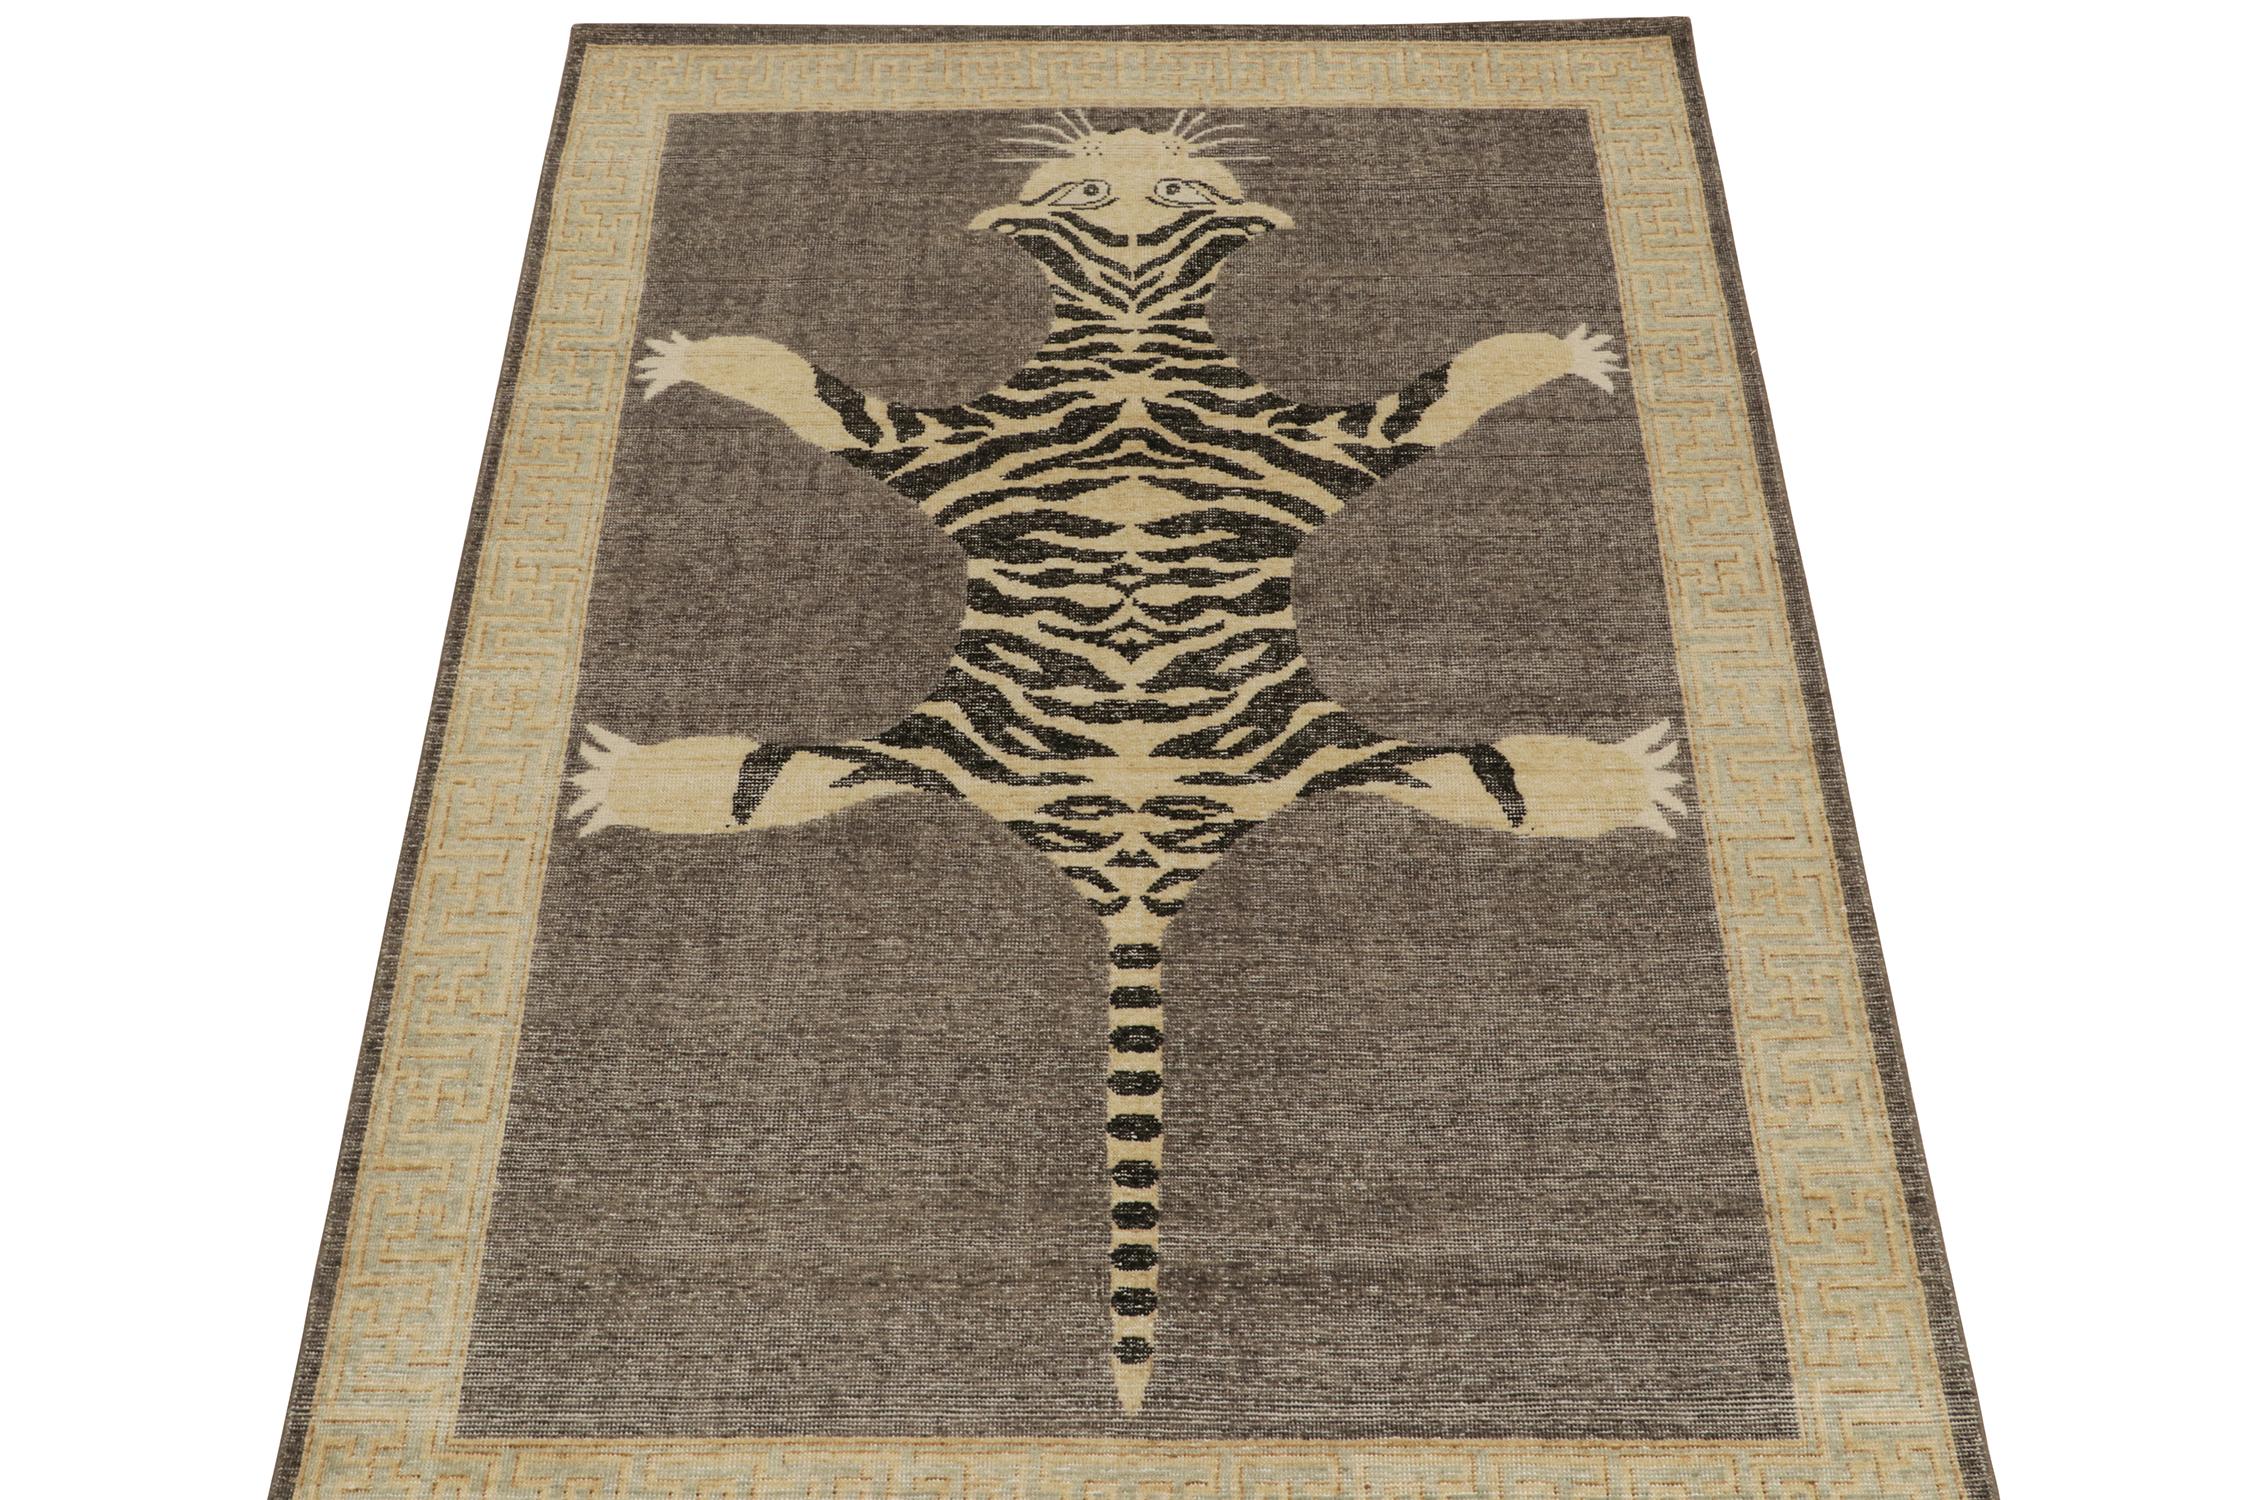 This hand-knotted wool 6x9 rug from Rug & Kilim’s Homage Collection recaptures the time-honored Tiger skin rug style.

Further On the Design: 

This particular piece is inspired by antique Indian Tiger-skin rugs of the most regal, graphic